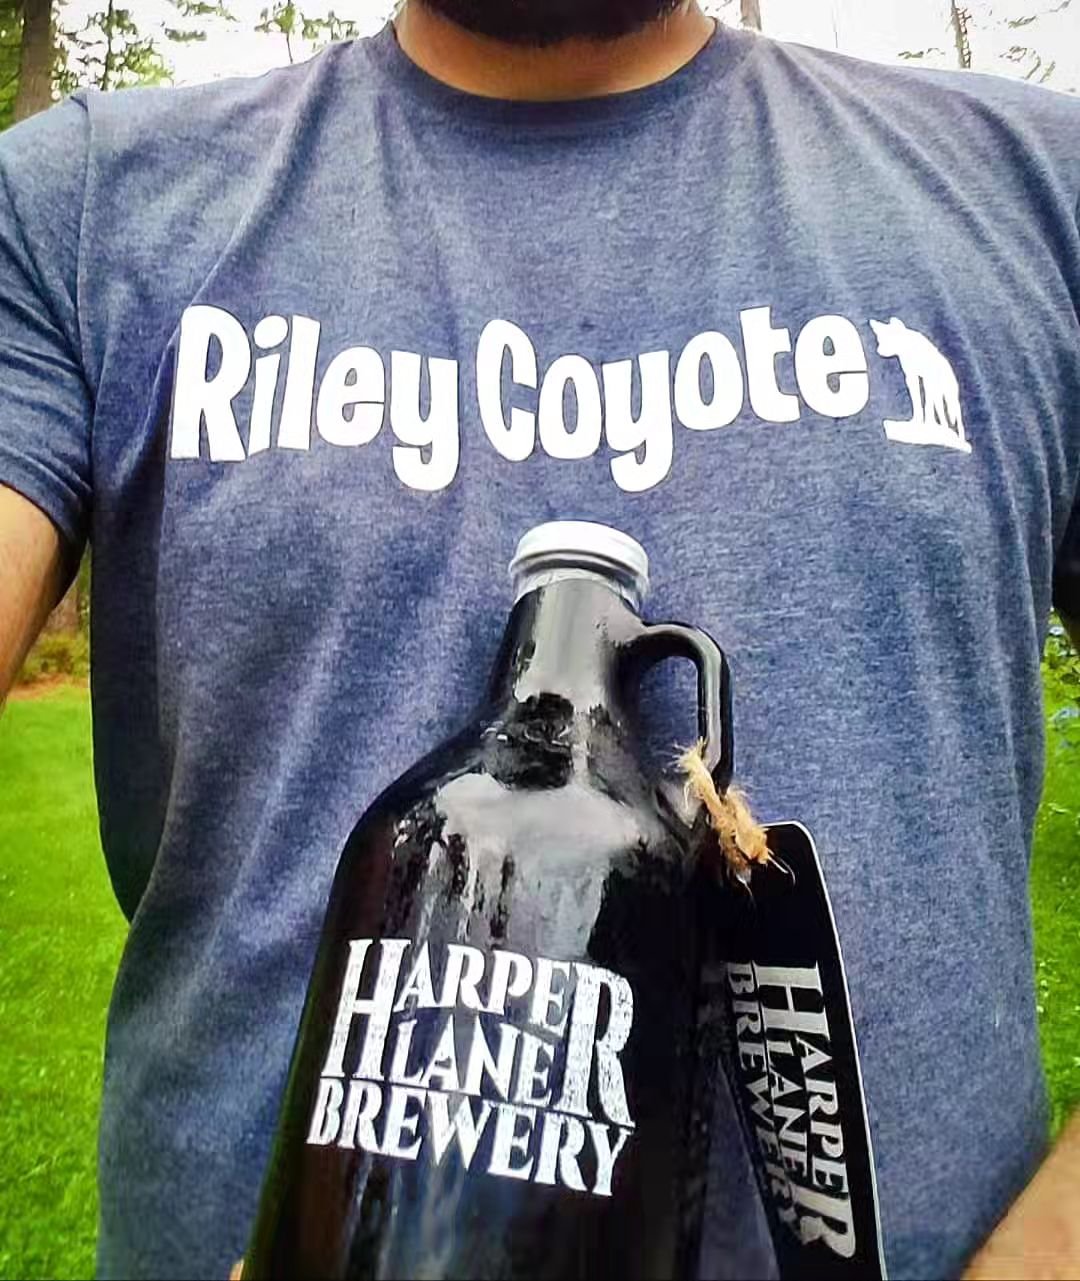 It's going down tonight! Riley Coyote live in the taproom! 7- 9:30pm Come on by for some great music! Killer Food from @homerootts and tasty beer from yours truly. 

Kind of wild to think that all of us were born and raised here! Can't get much more 